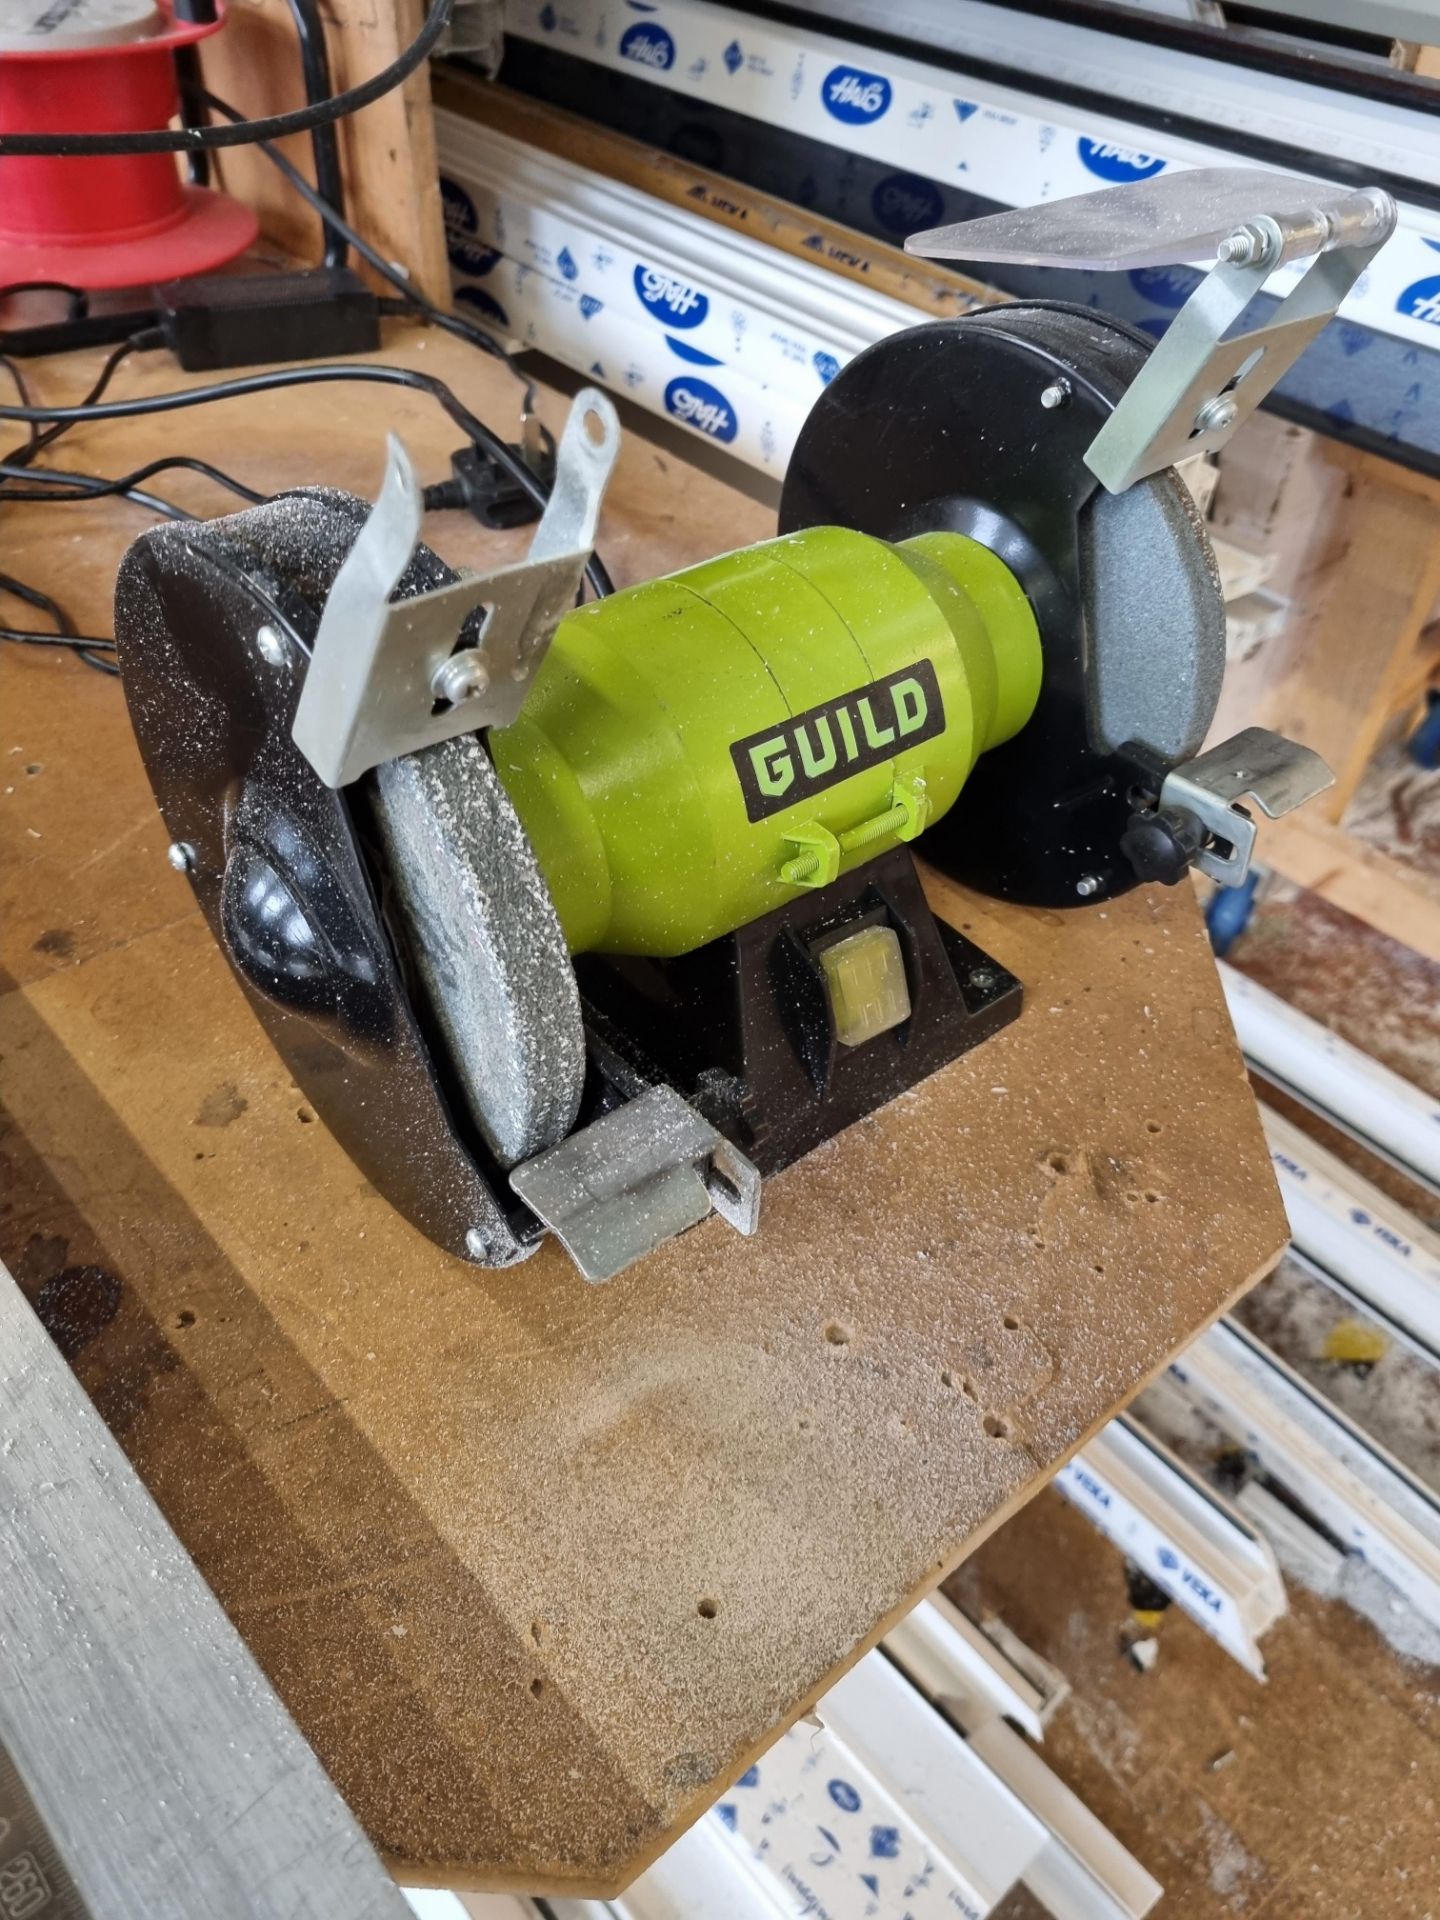 Compound mitre saw and a Guild double ended bench grinder - Image 2 of 2